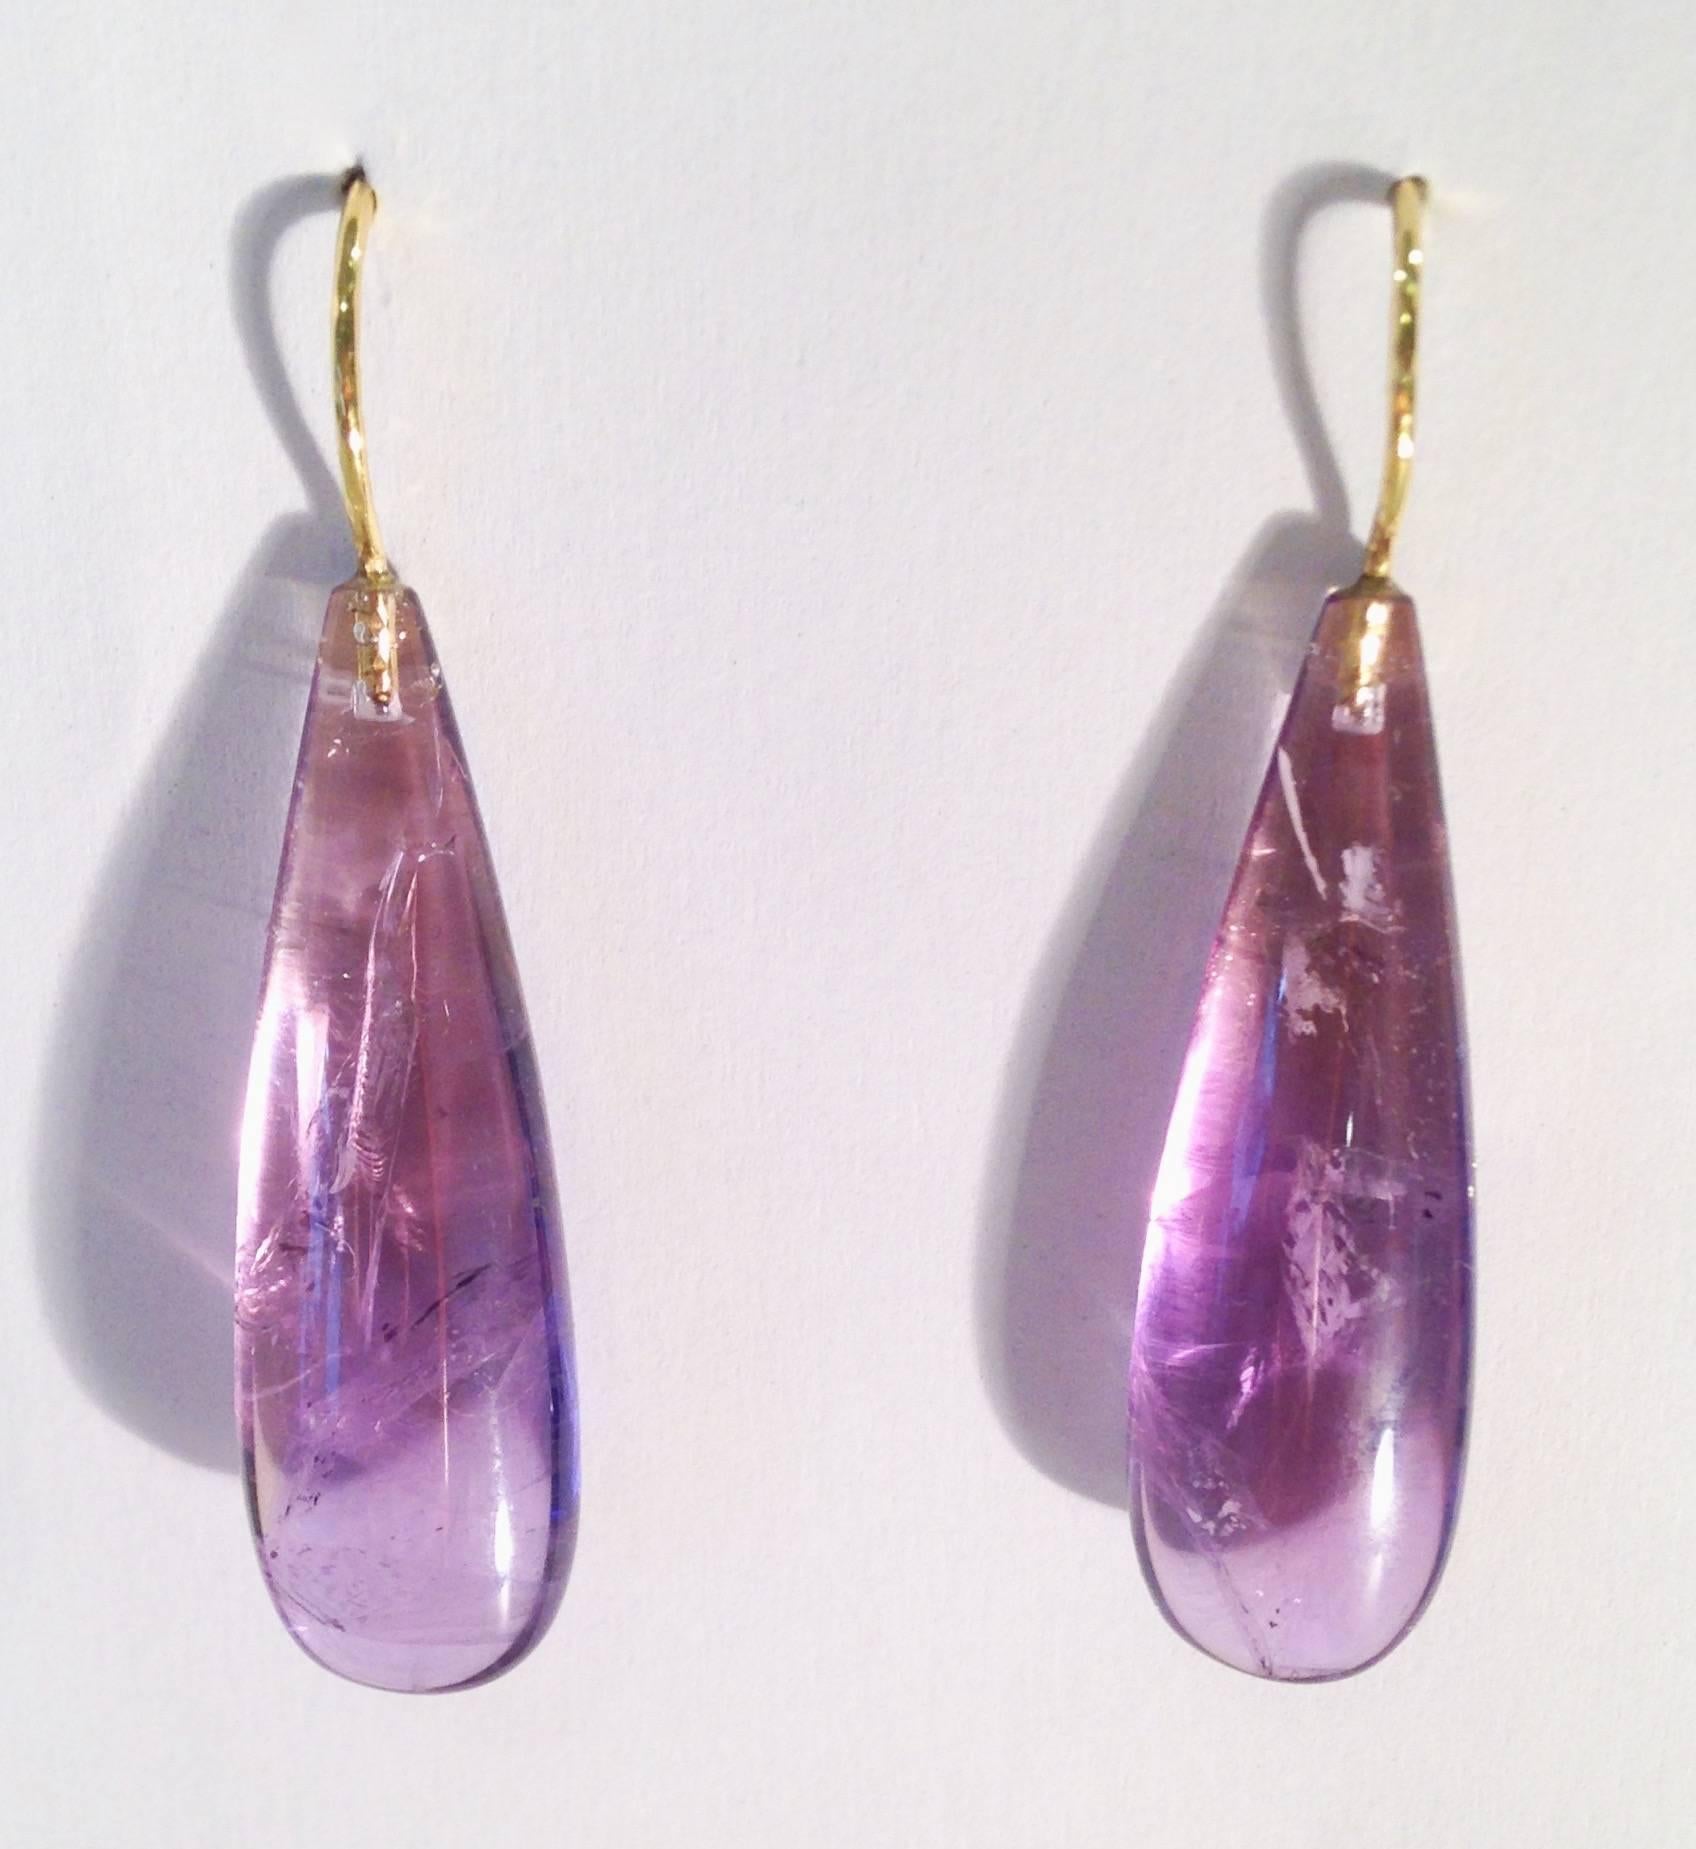 Susan created these earrings from 34.3ct Amethyst drops earrings with 18k hammered Yellow Gold wires.